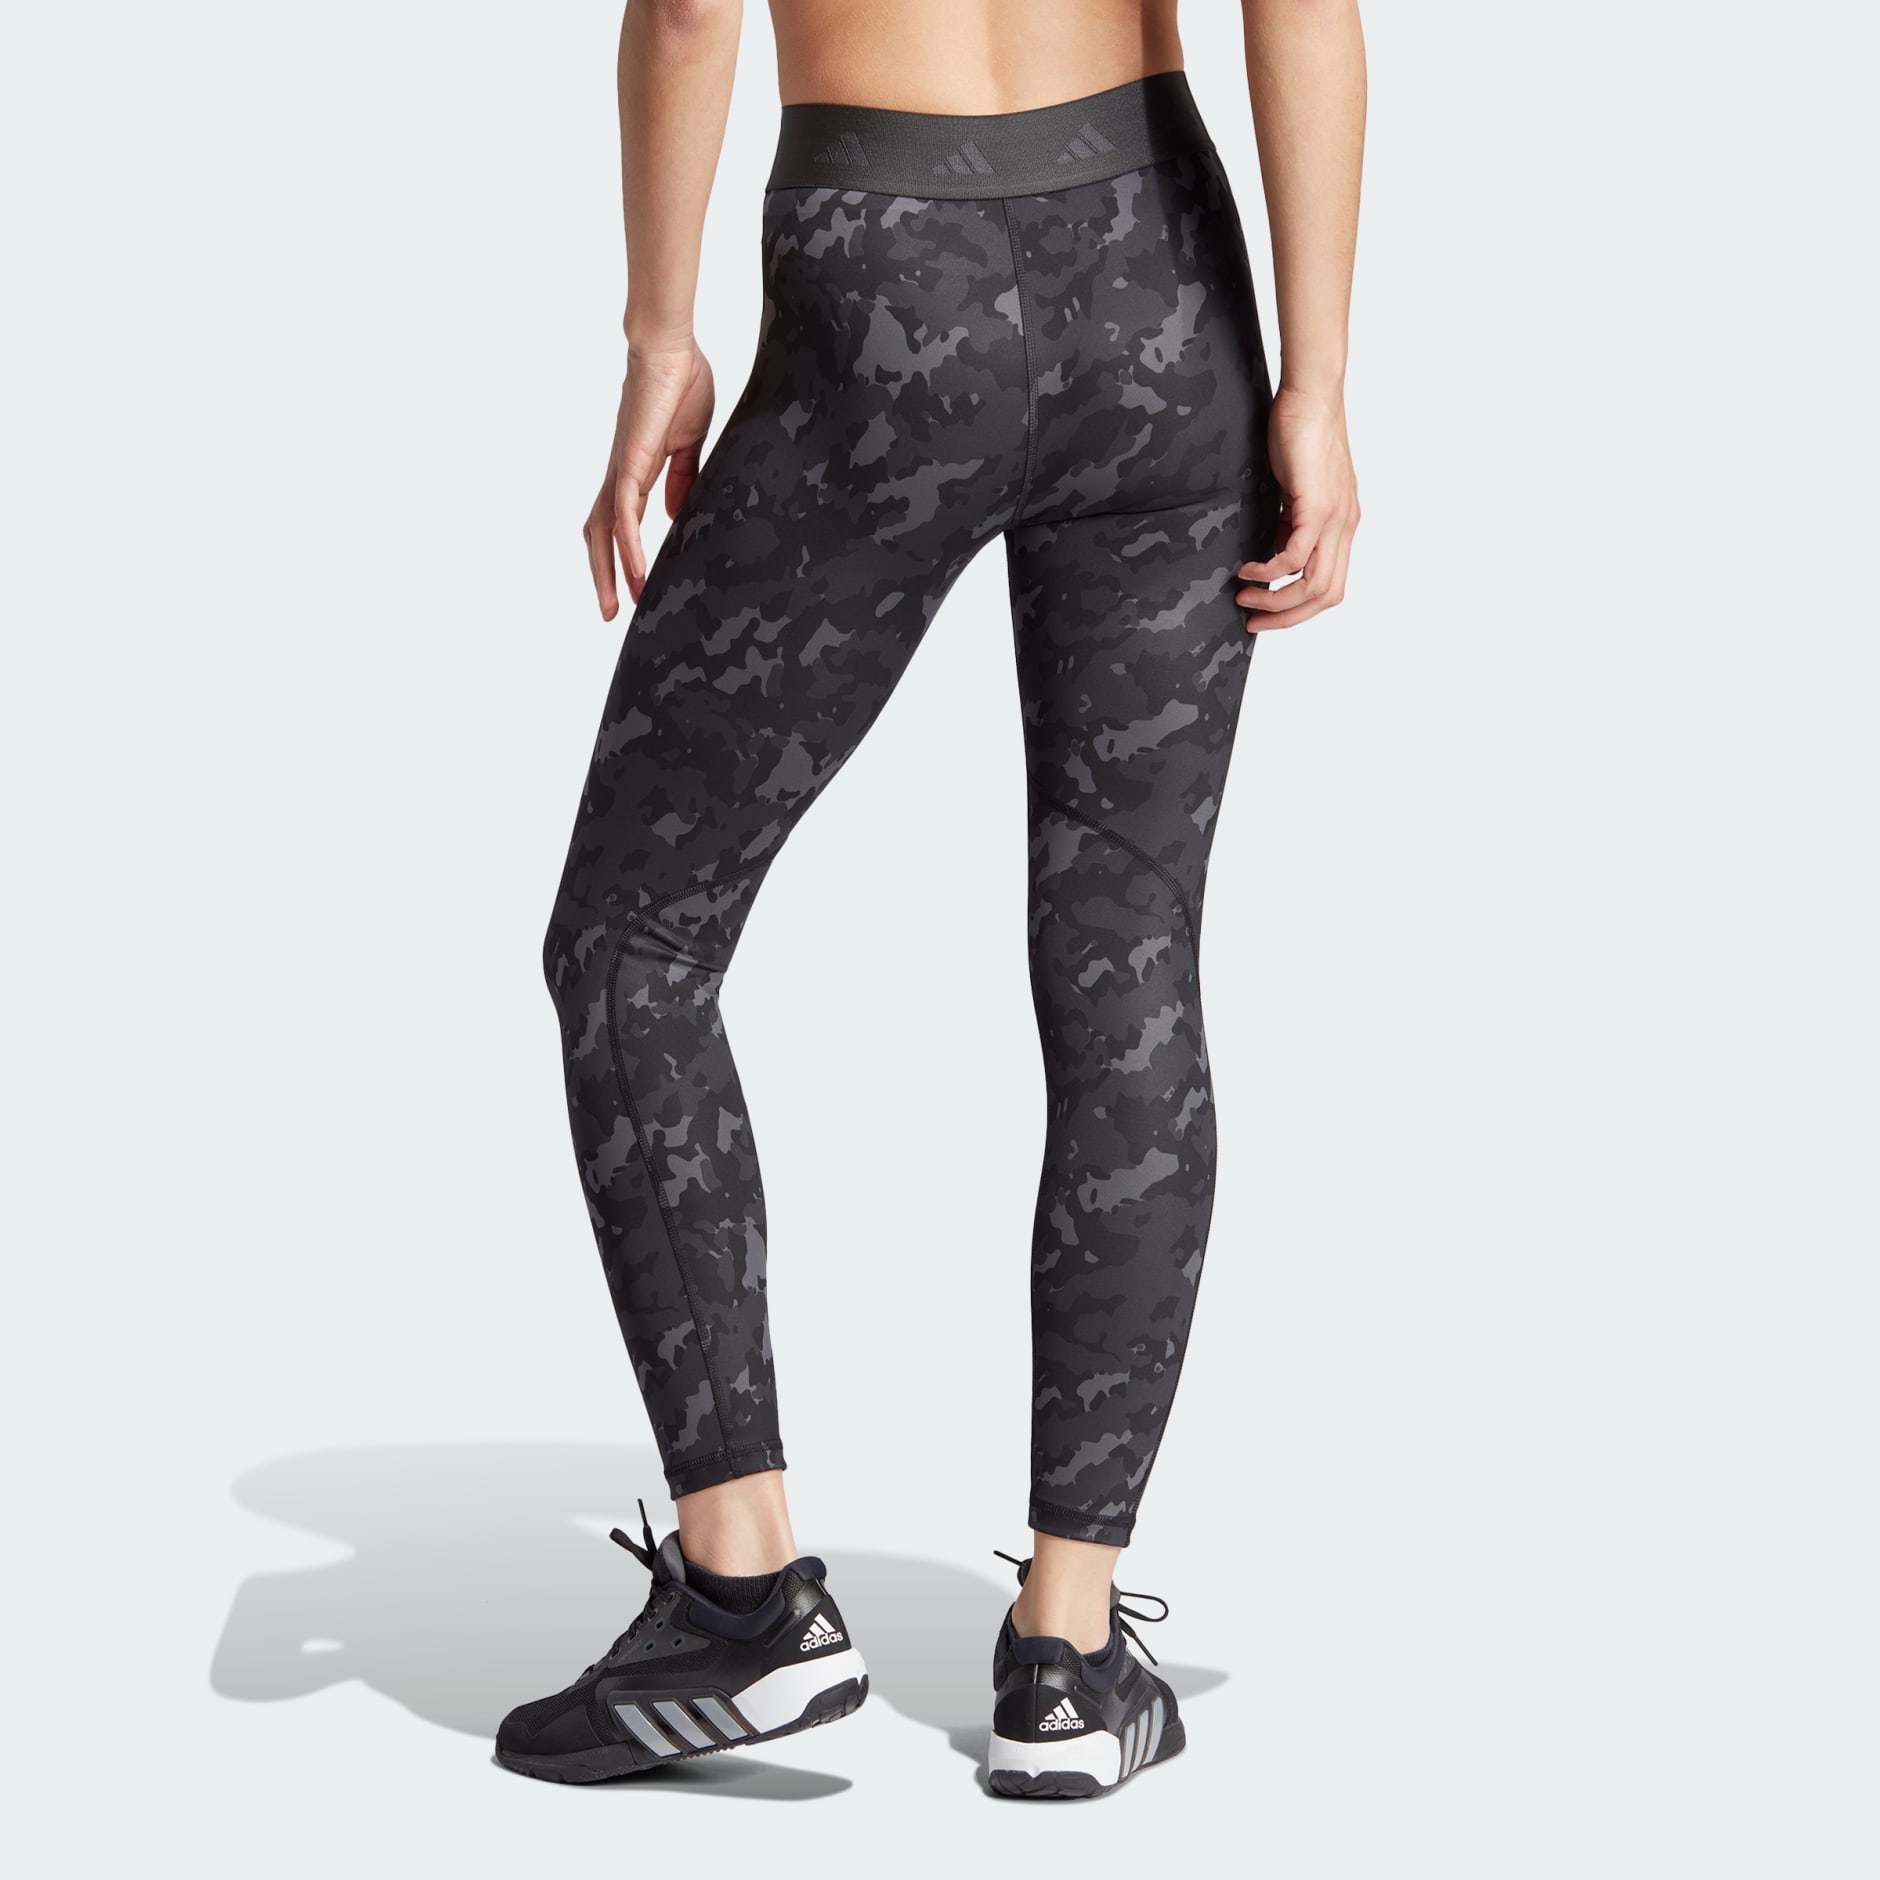 Carbon Black Camouflage Compression Lycra Leggings for Woman